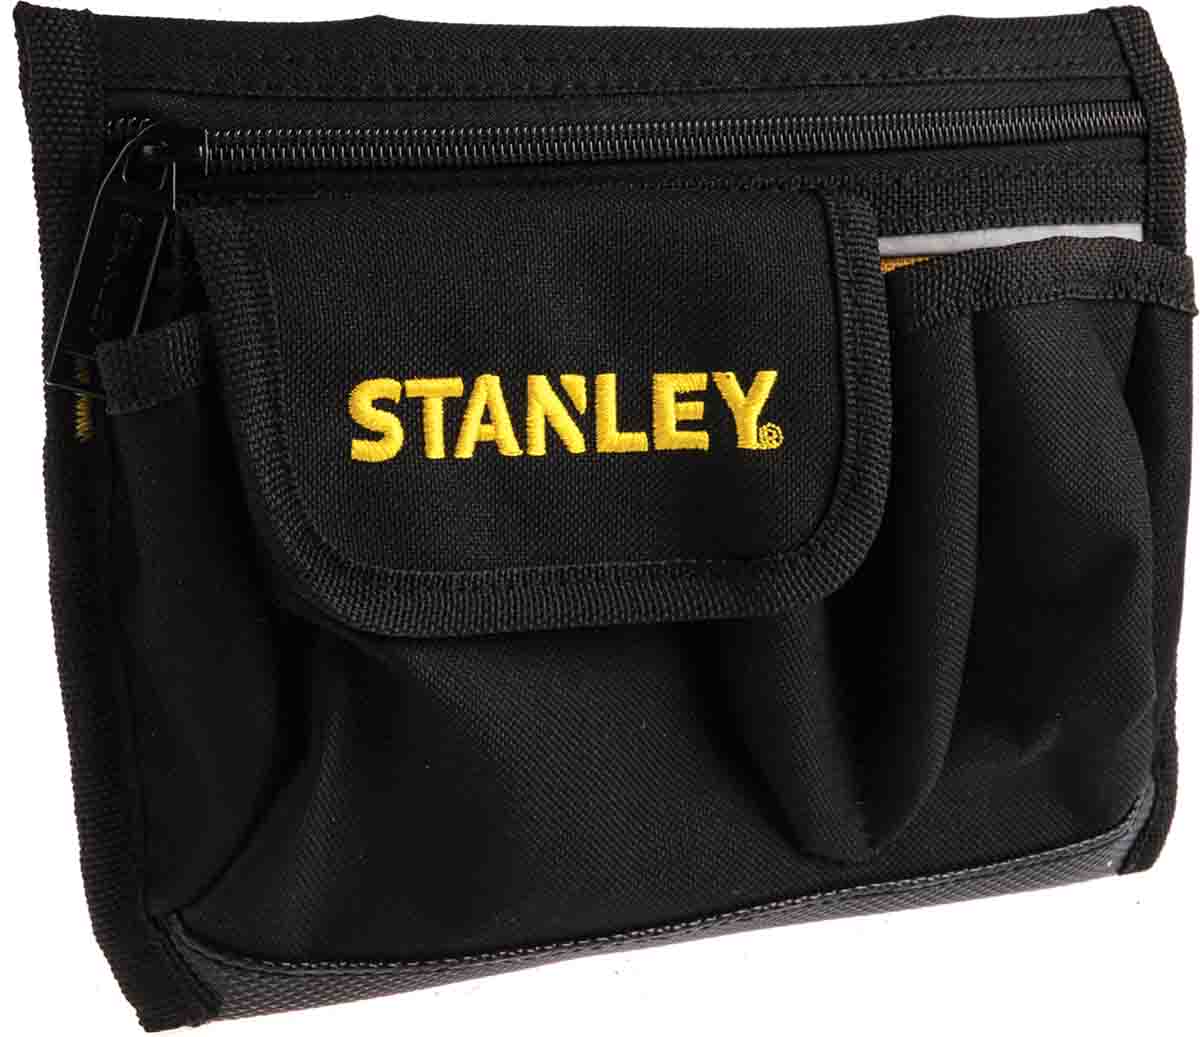 Stanley Tools 600 Denier Fabric, 3 Pocket Tool Belt Pouch